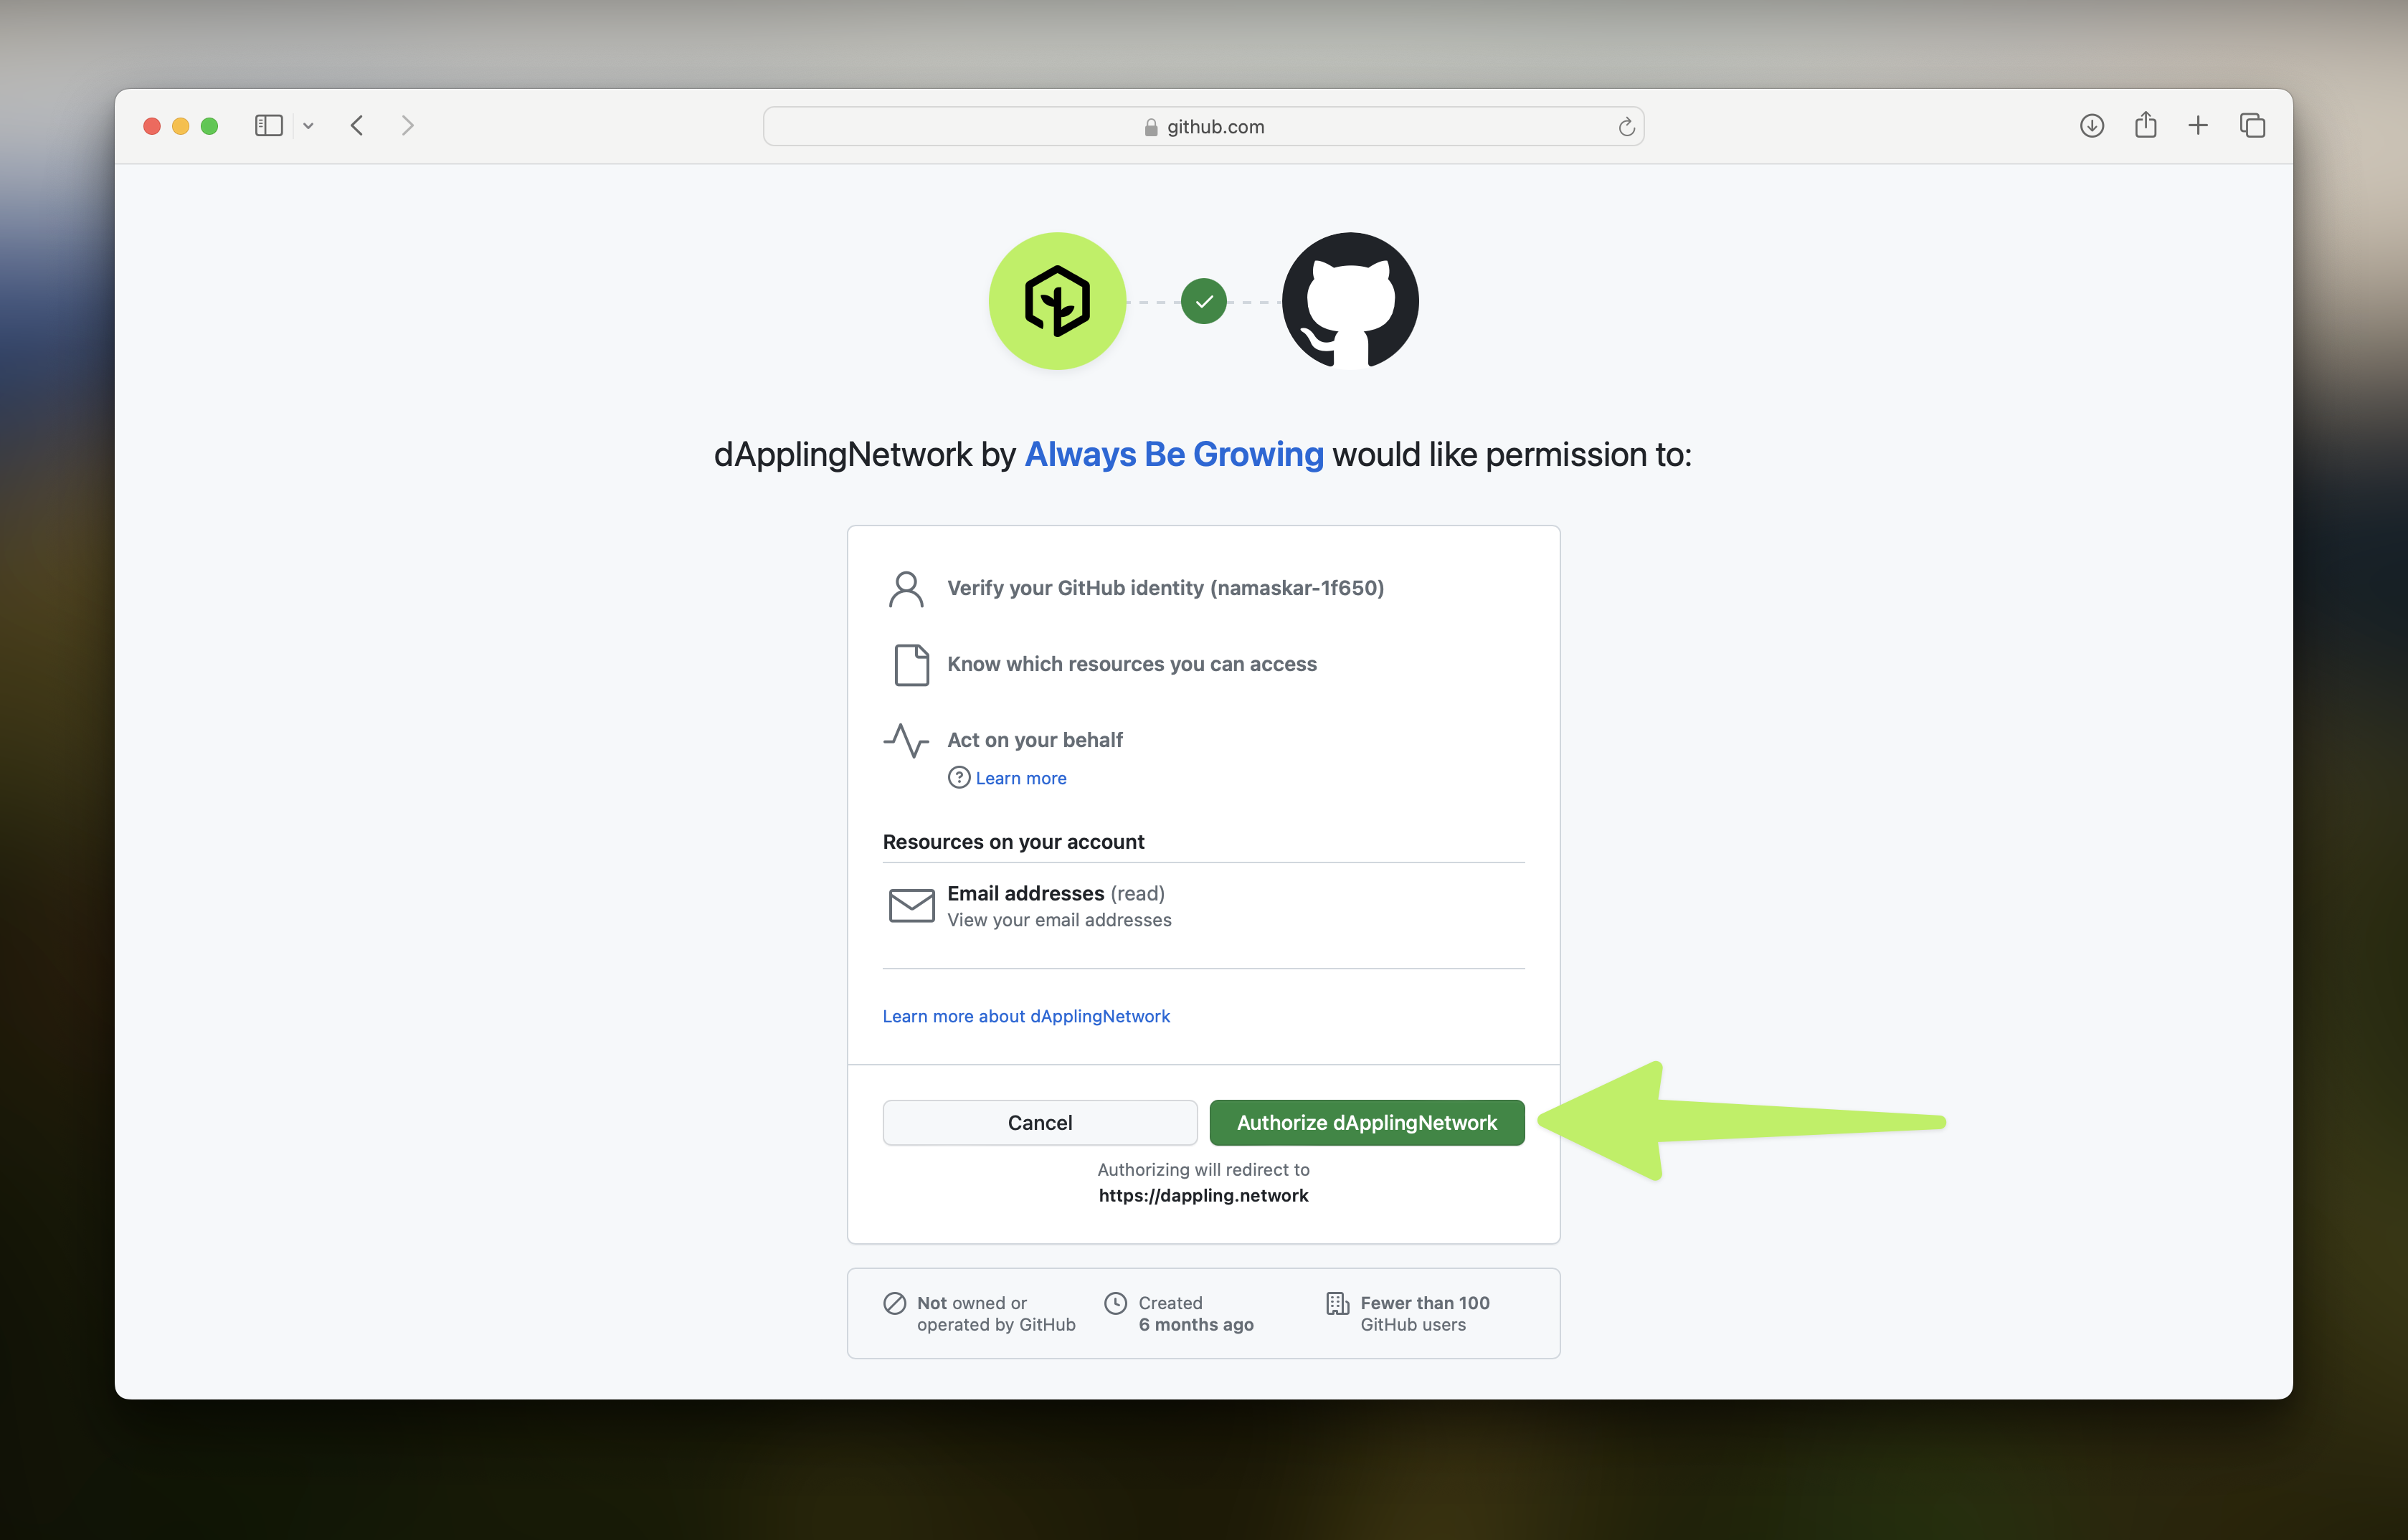 GitHub pops up, asking the user to authorize dAppling's app.